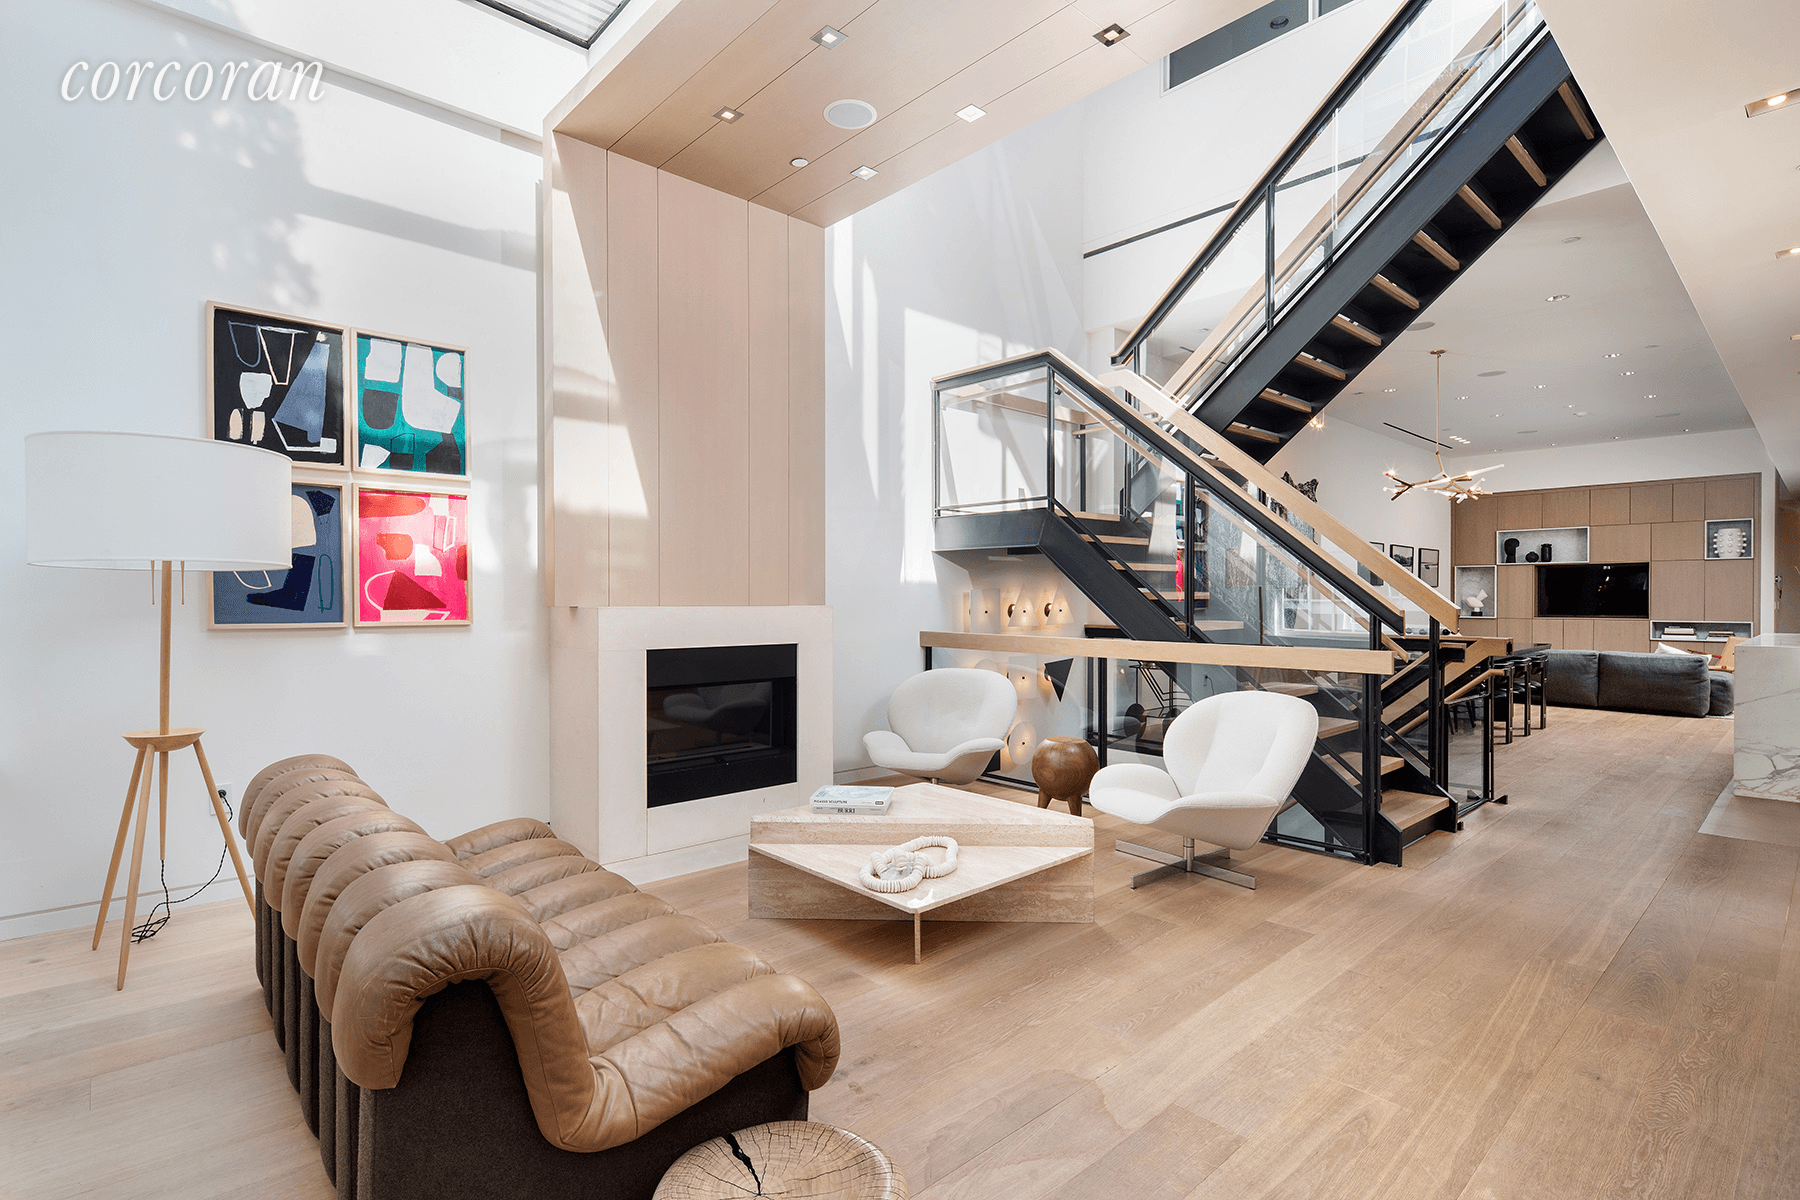 Unprecedented contemporary style and spectacular indoor outdoor living are the hallmarks of this exceptional, five bedroom, four bathroom penthouse triplex in the heart of Tribeca.